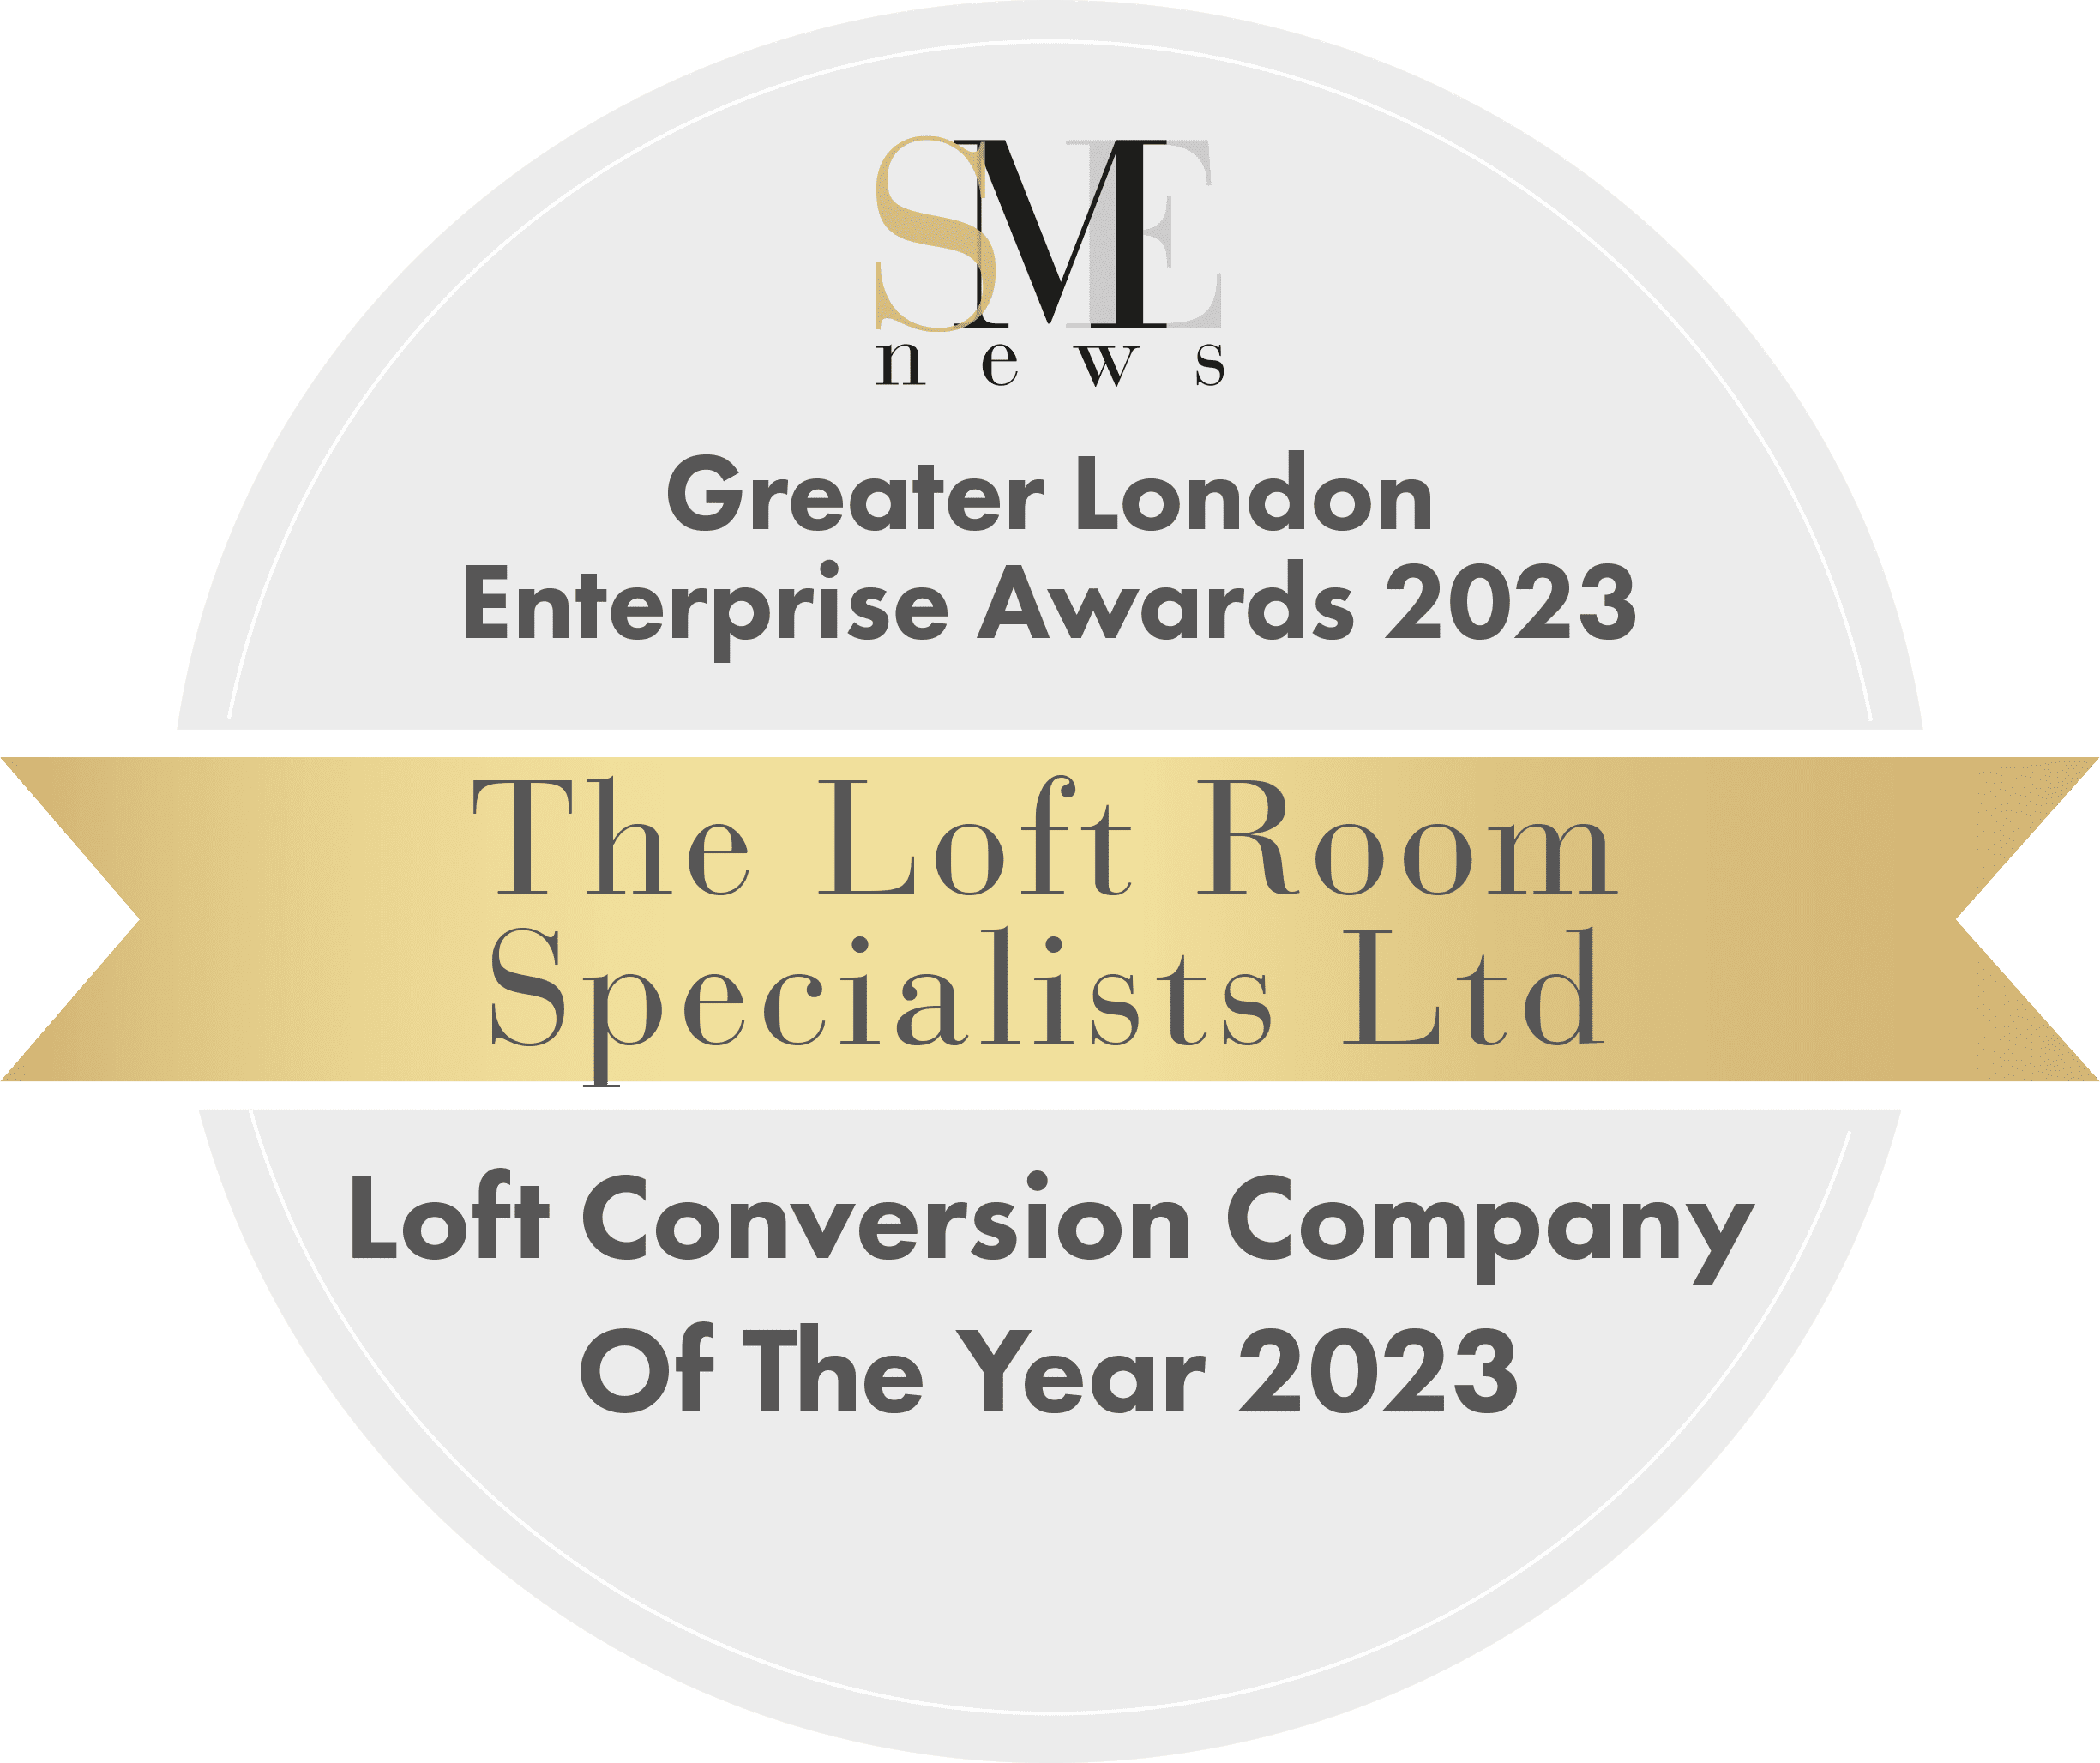 Loft Conversion Company of the Year 2023